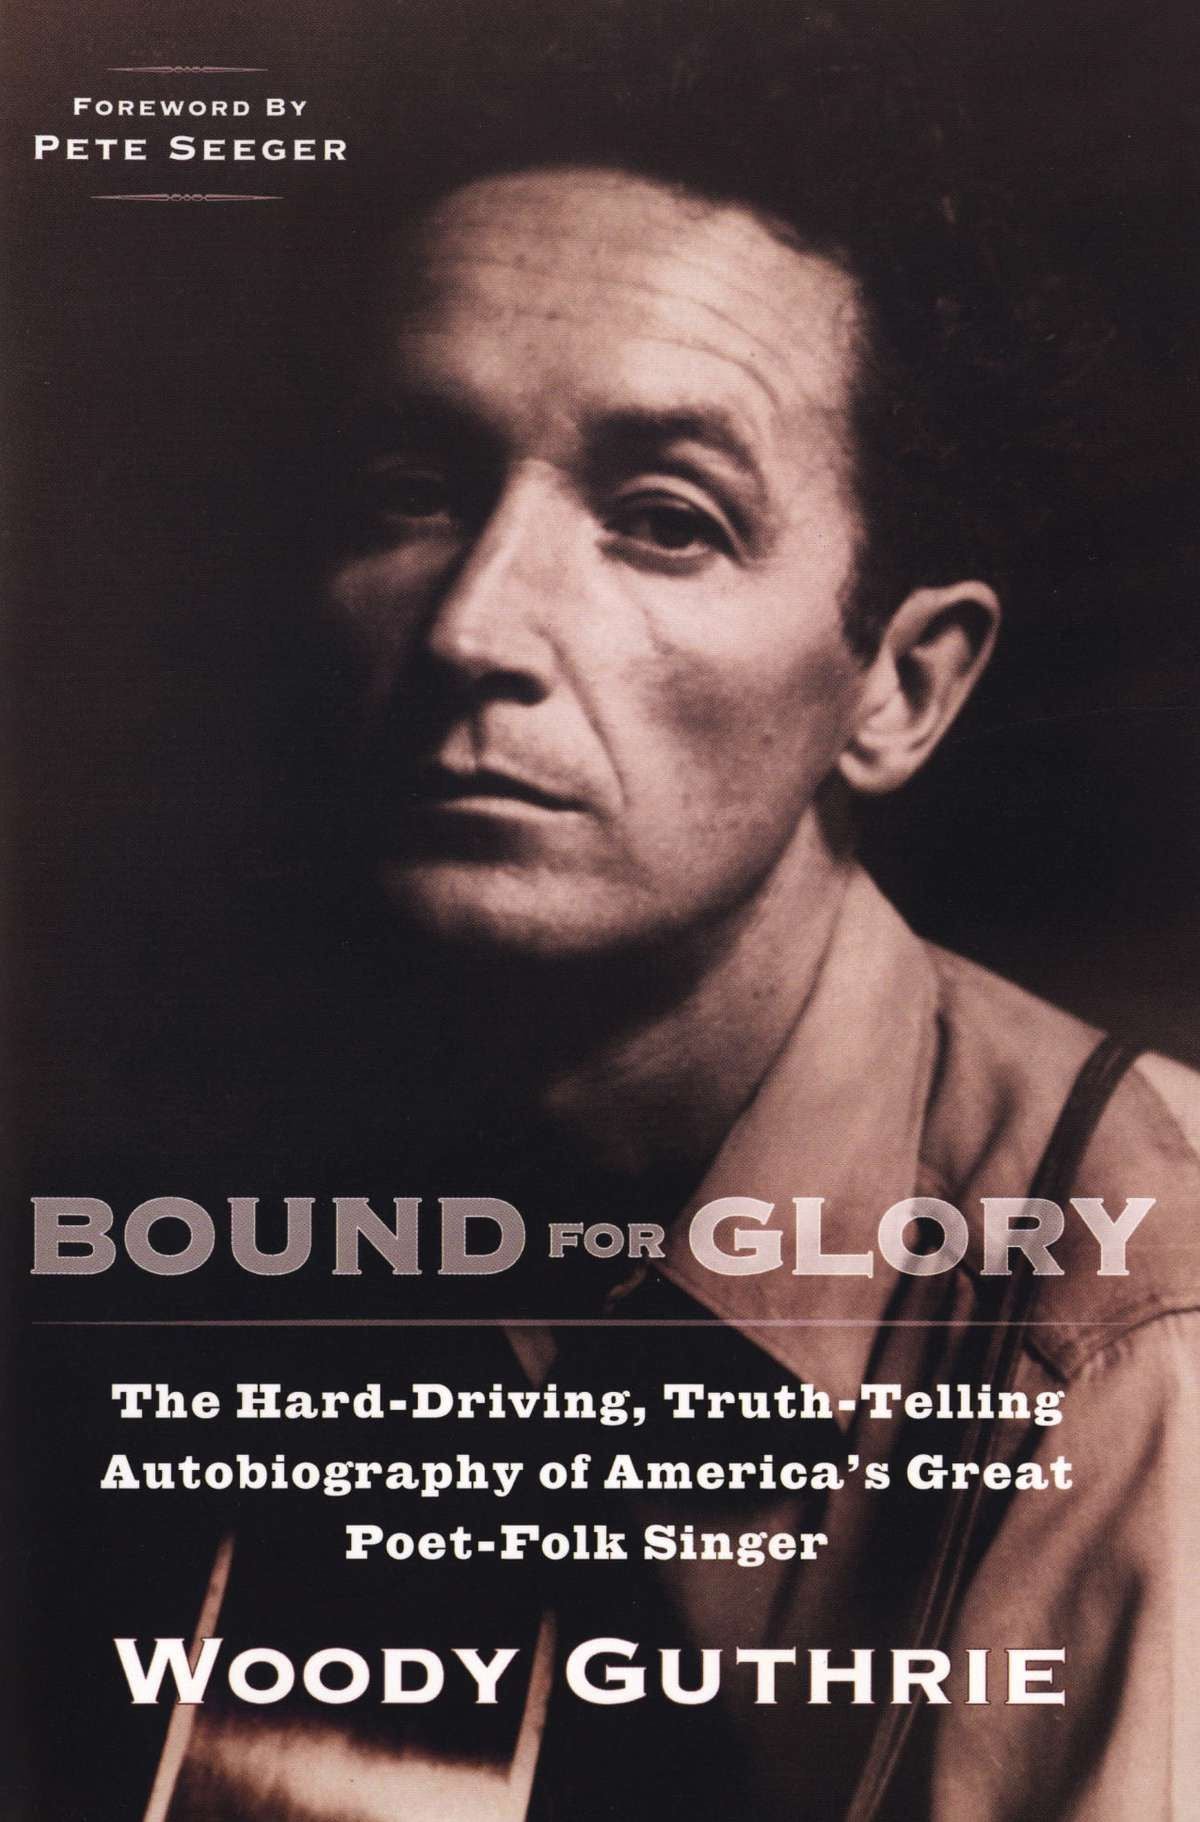 WOODY GUTHRIE - BOUND FOR GLORY - LIBRO